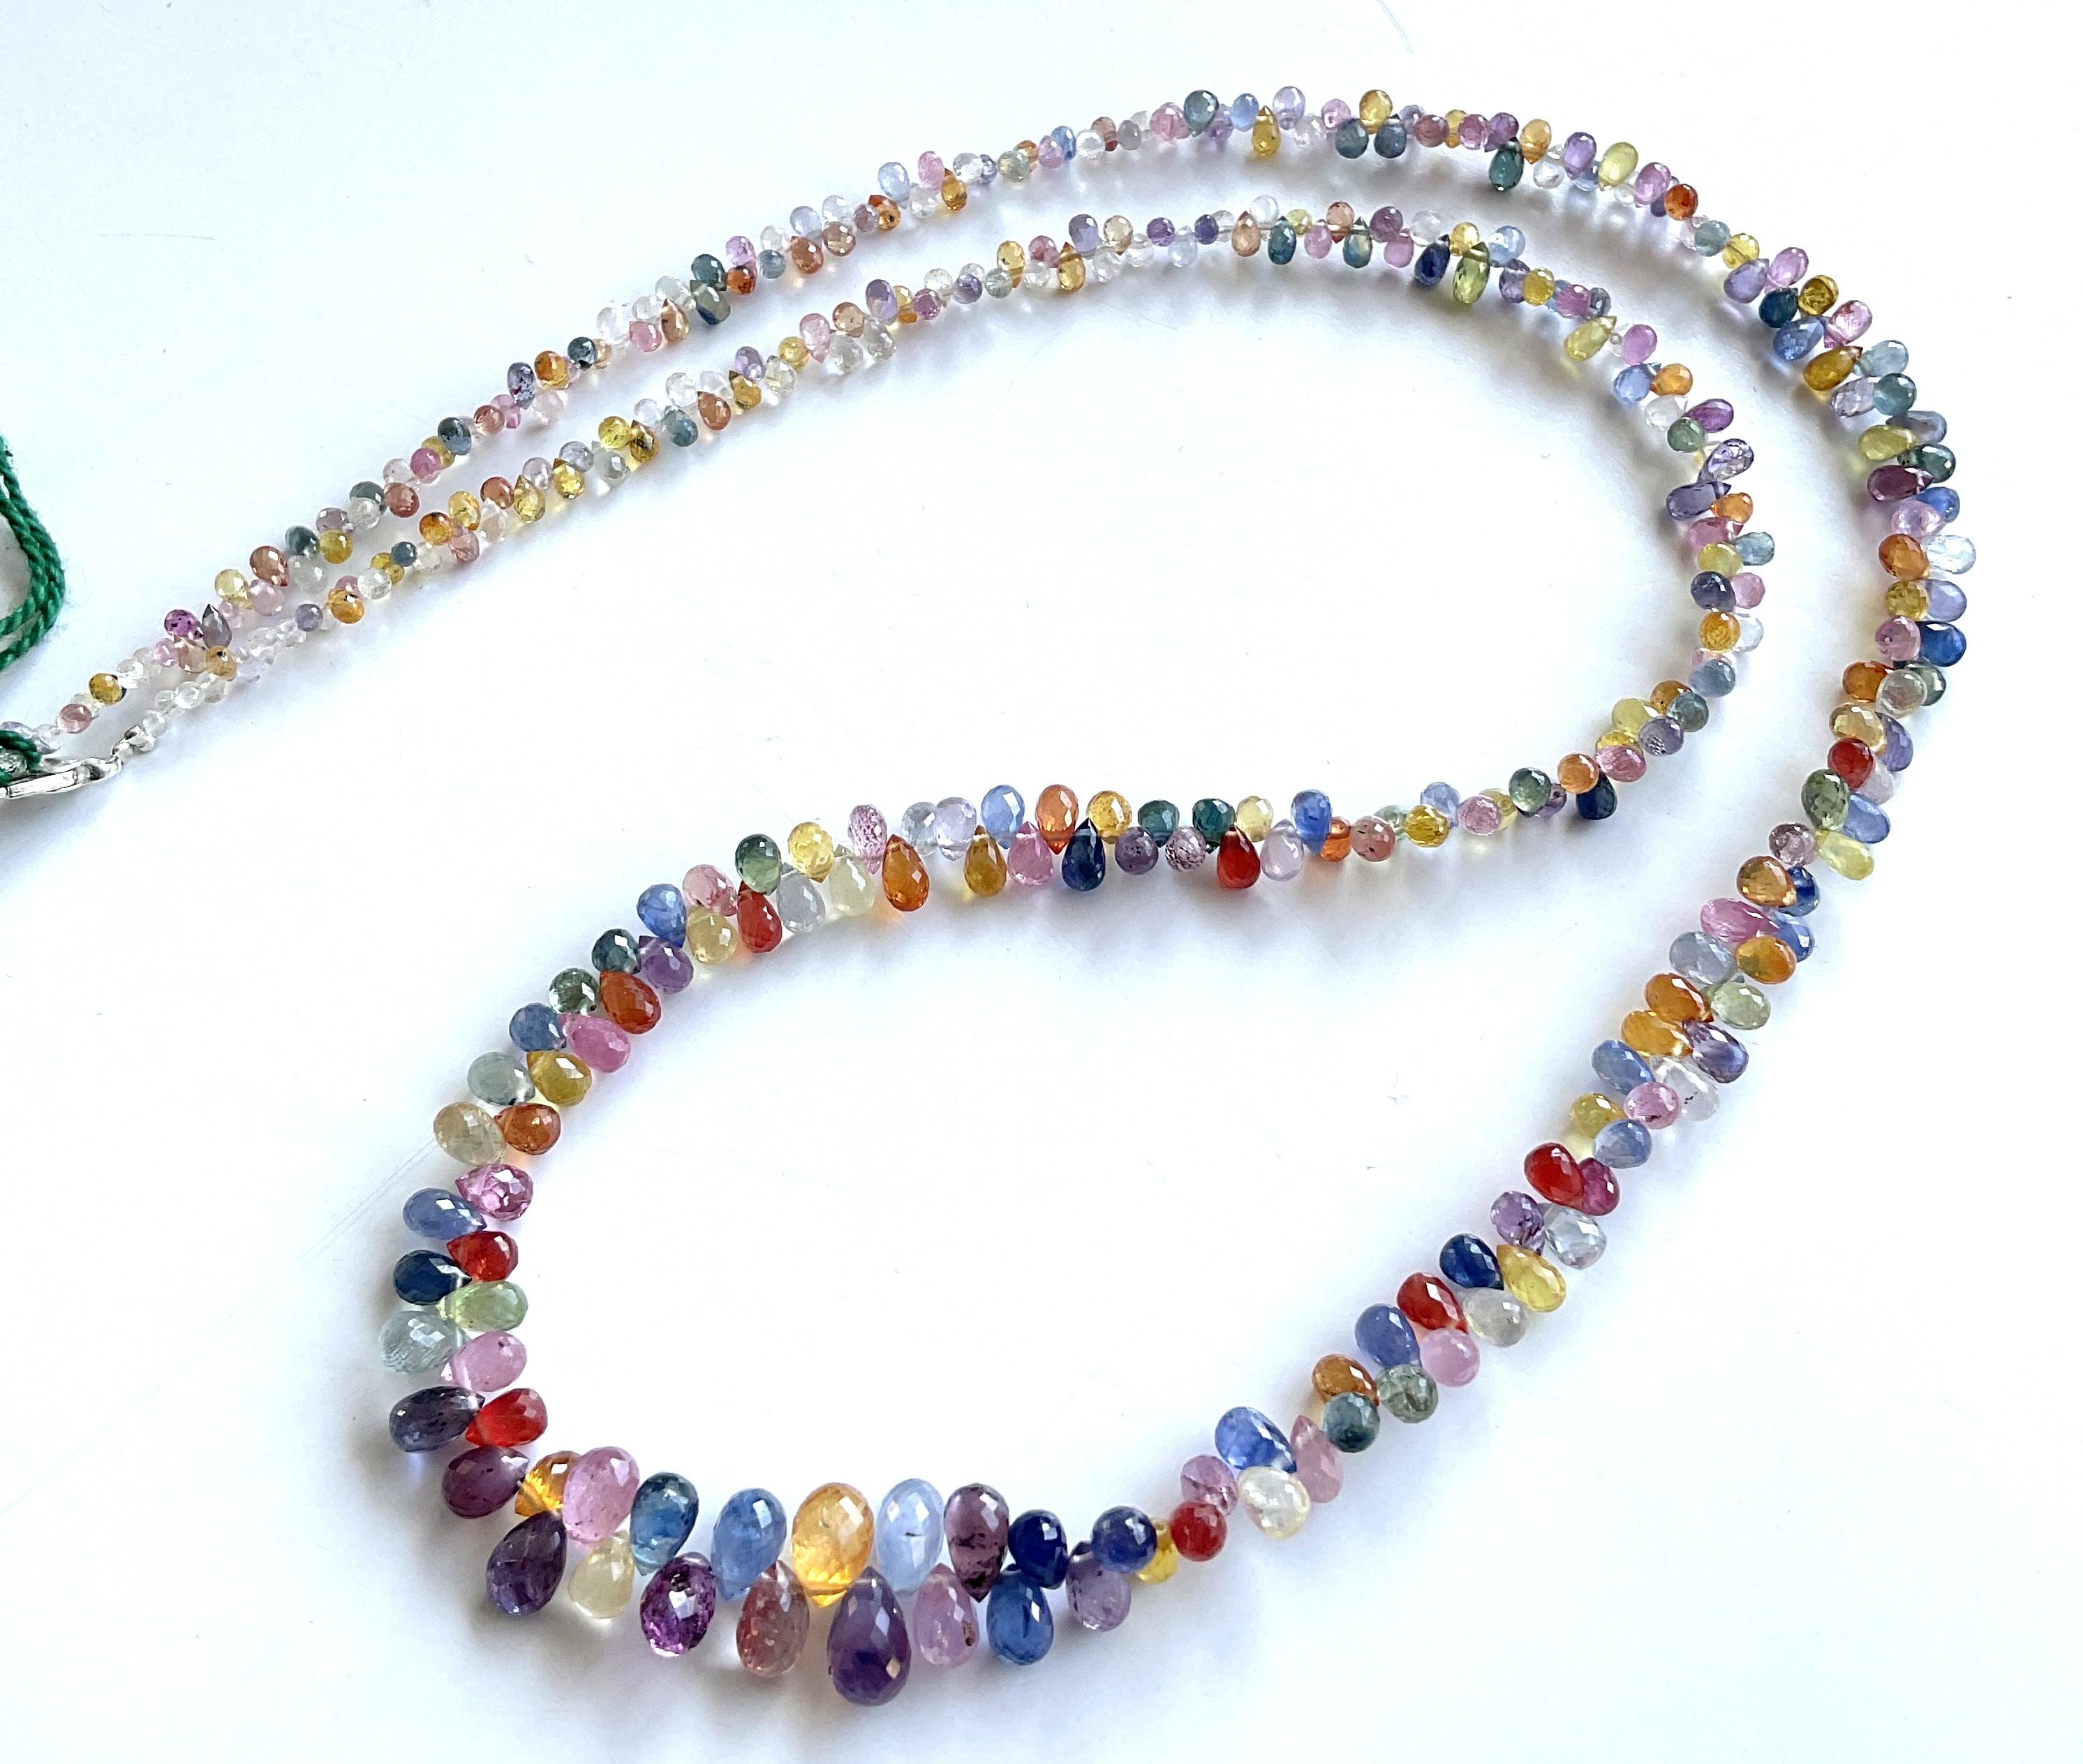 Bead 127.00 Carats Multi Color Sapphire Drops Top Quality Natural Gem Fine Jewelry For Sale